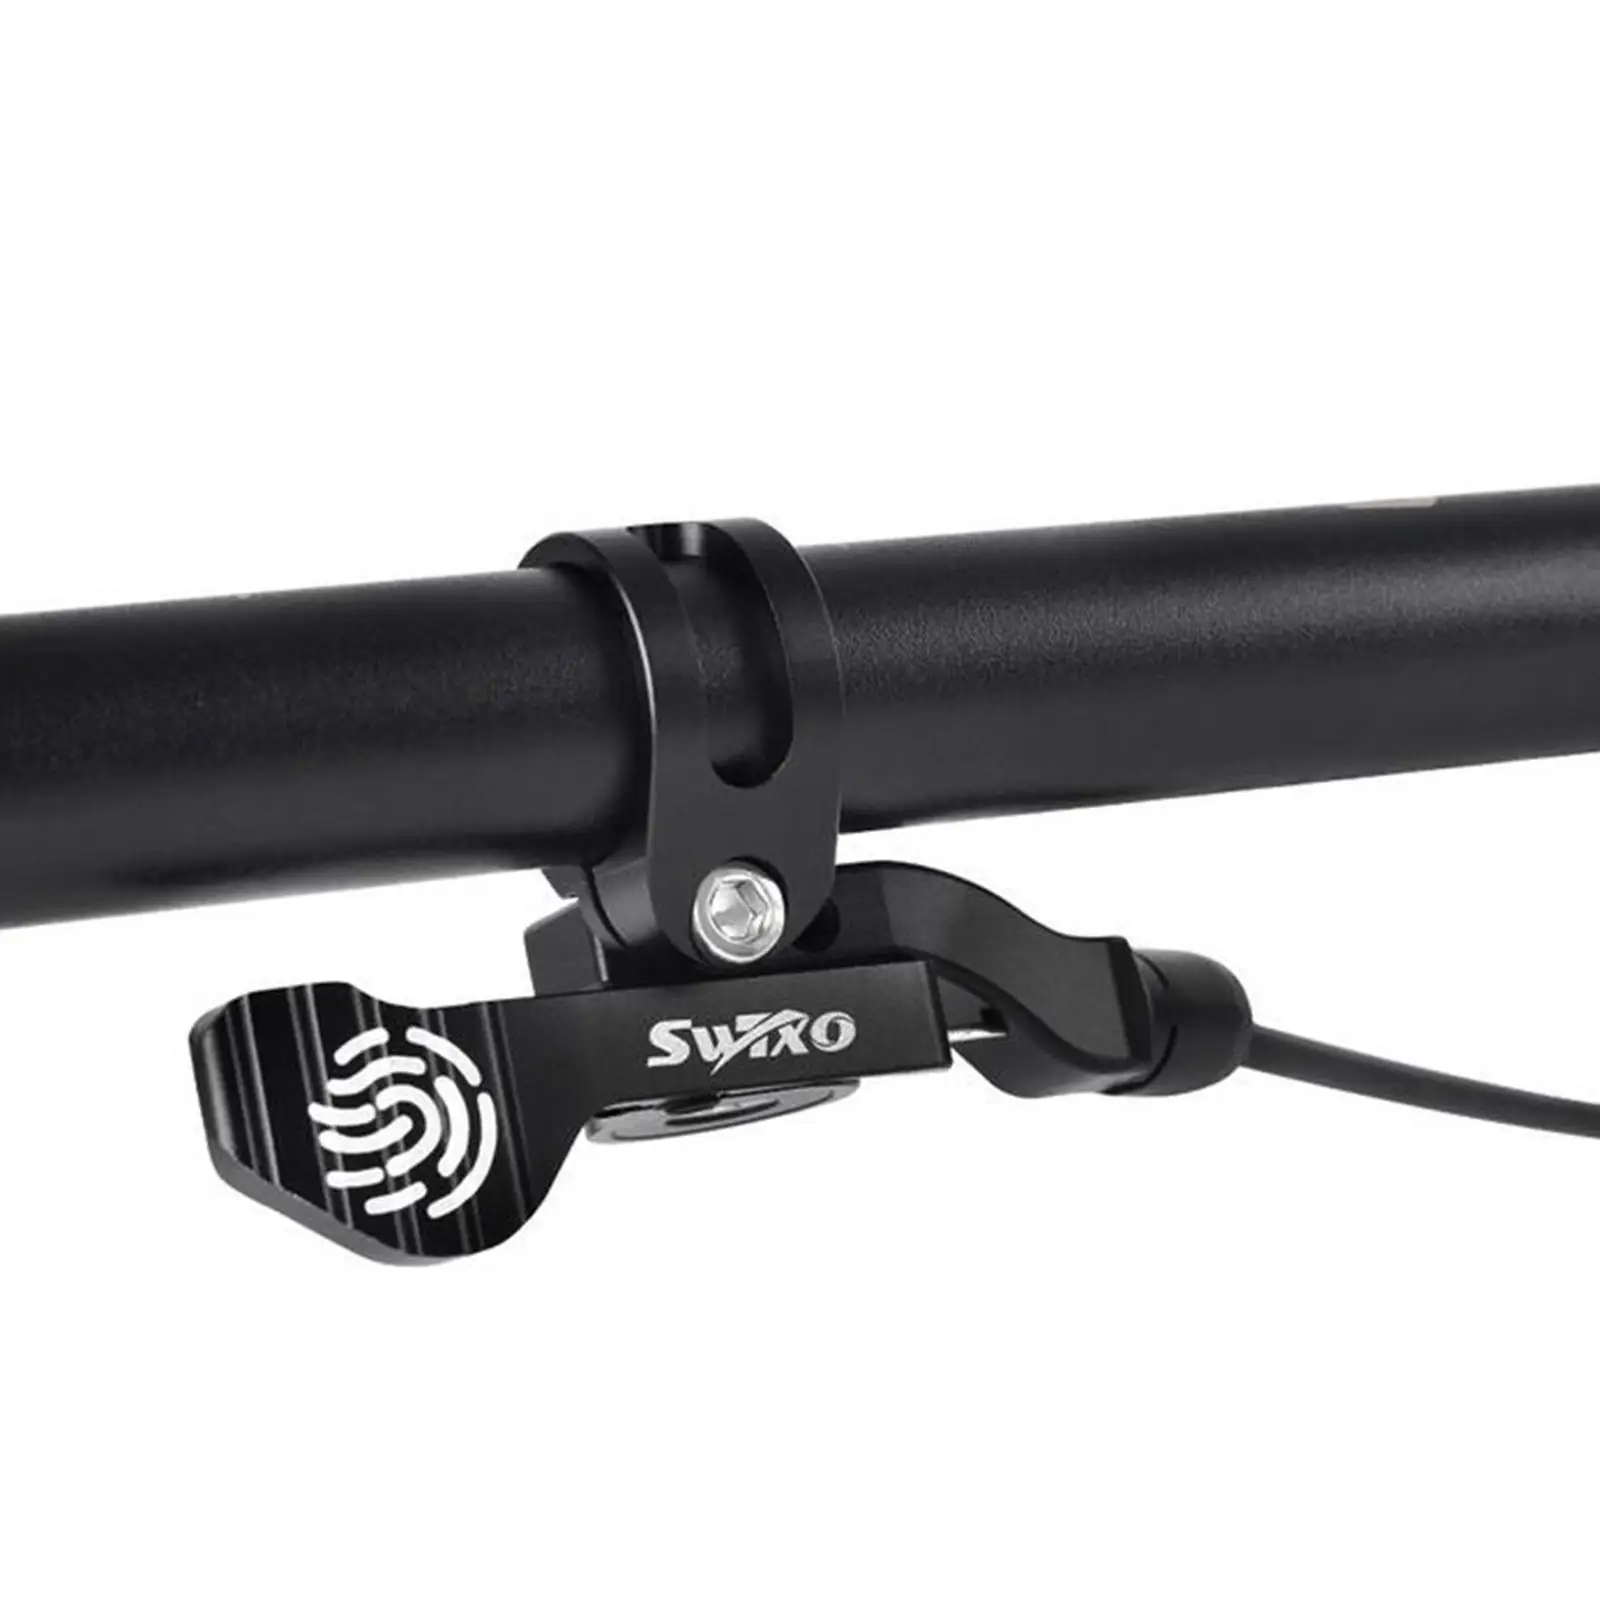 Seatpost Dropper  , for .2mm bar, External and Internal Routing Droppers, Control   -Use,  Wire 